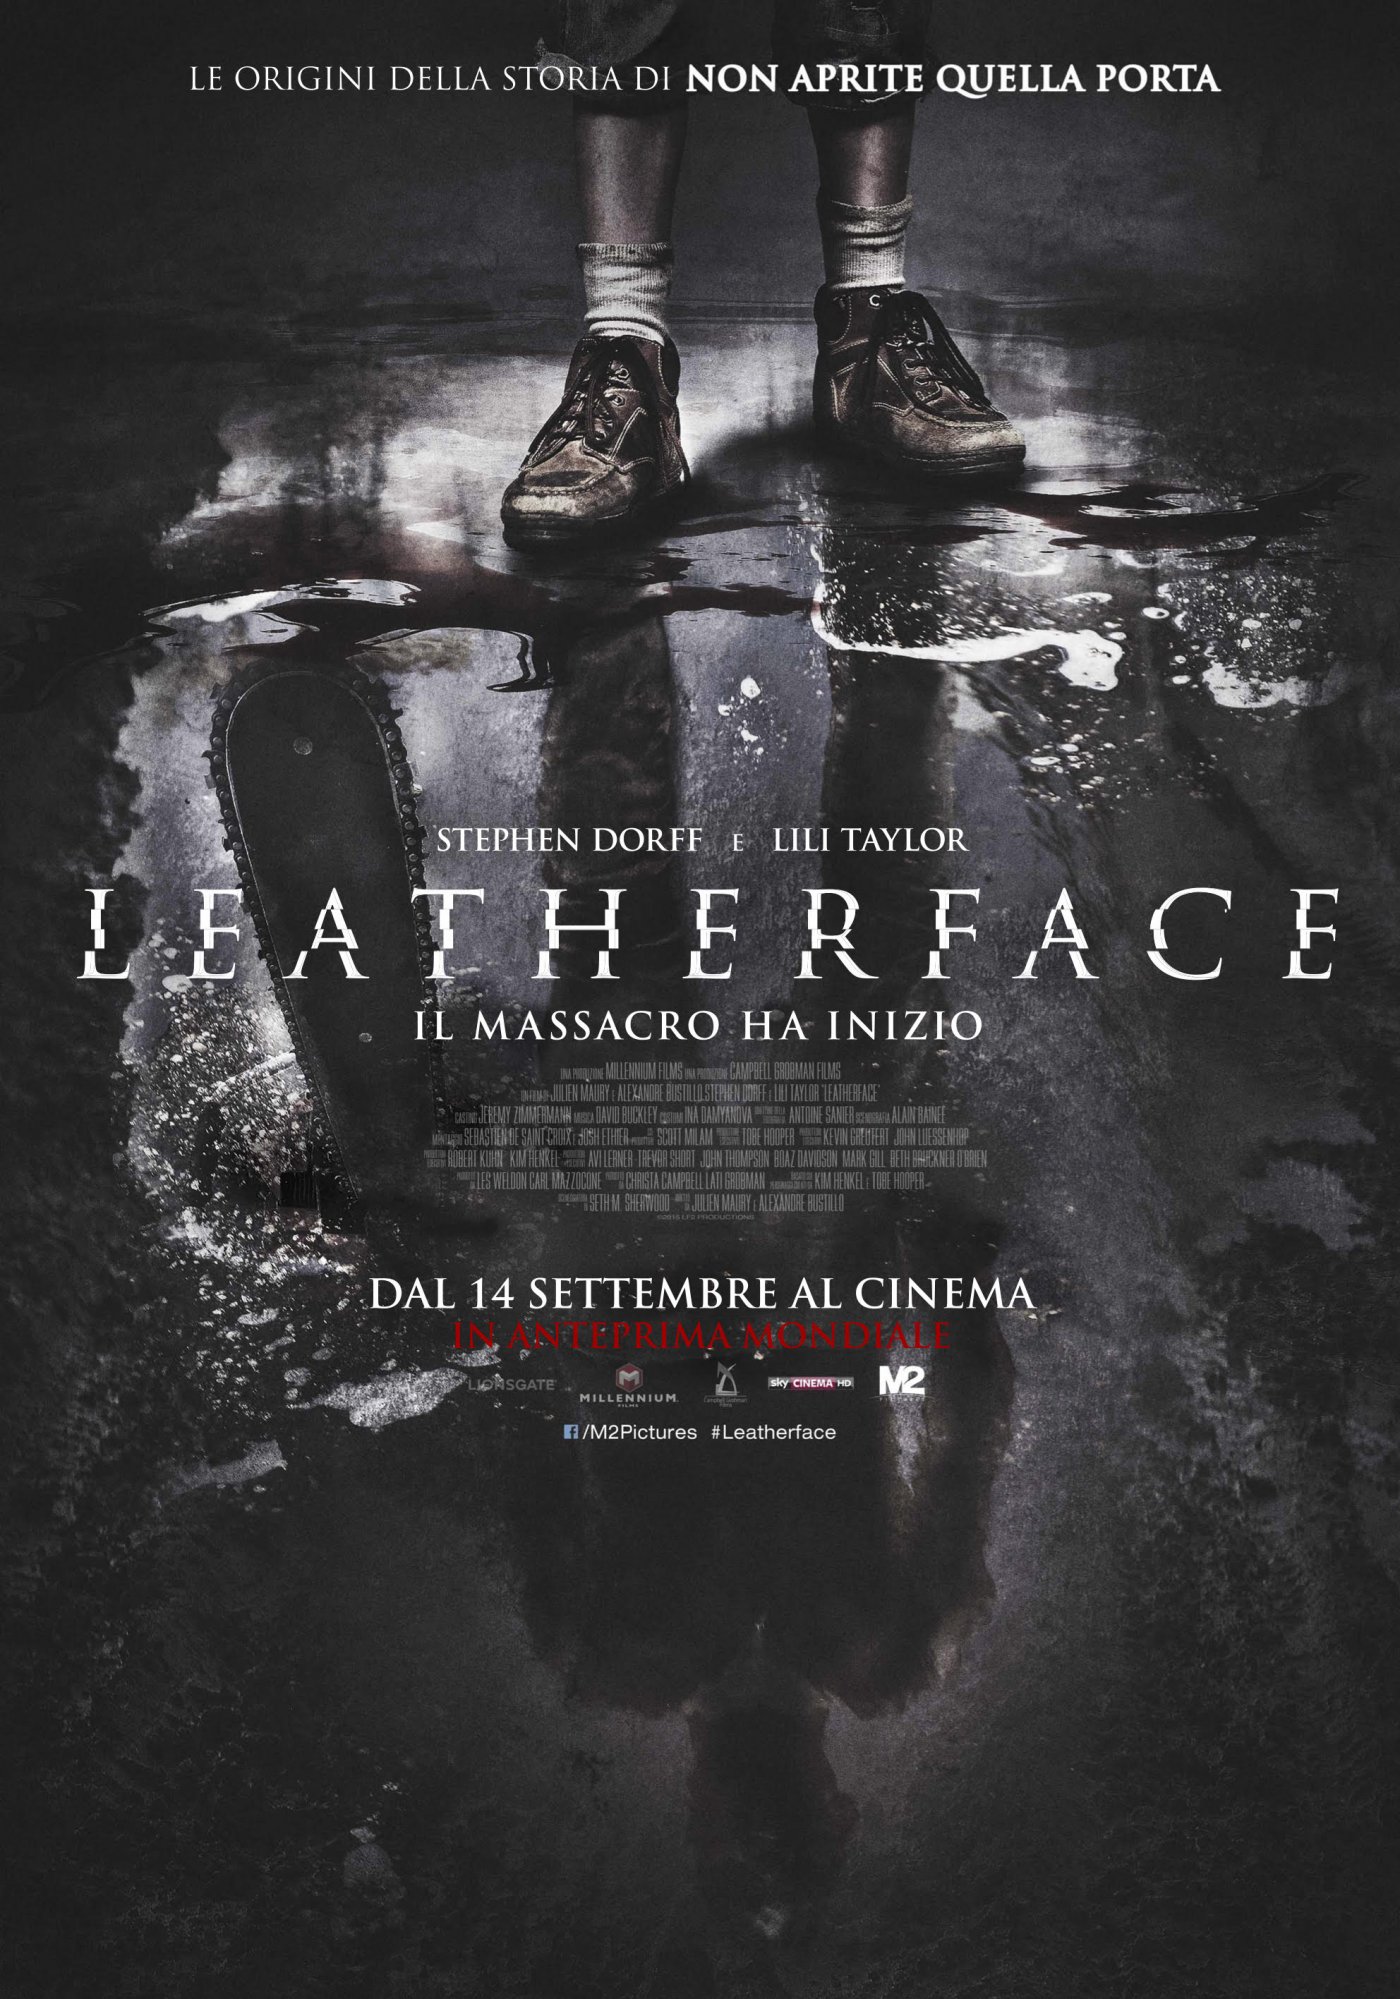 https://movieplayer.it/film/leatherface_41209/